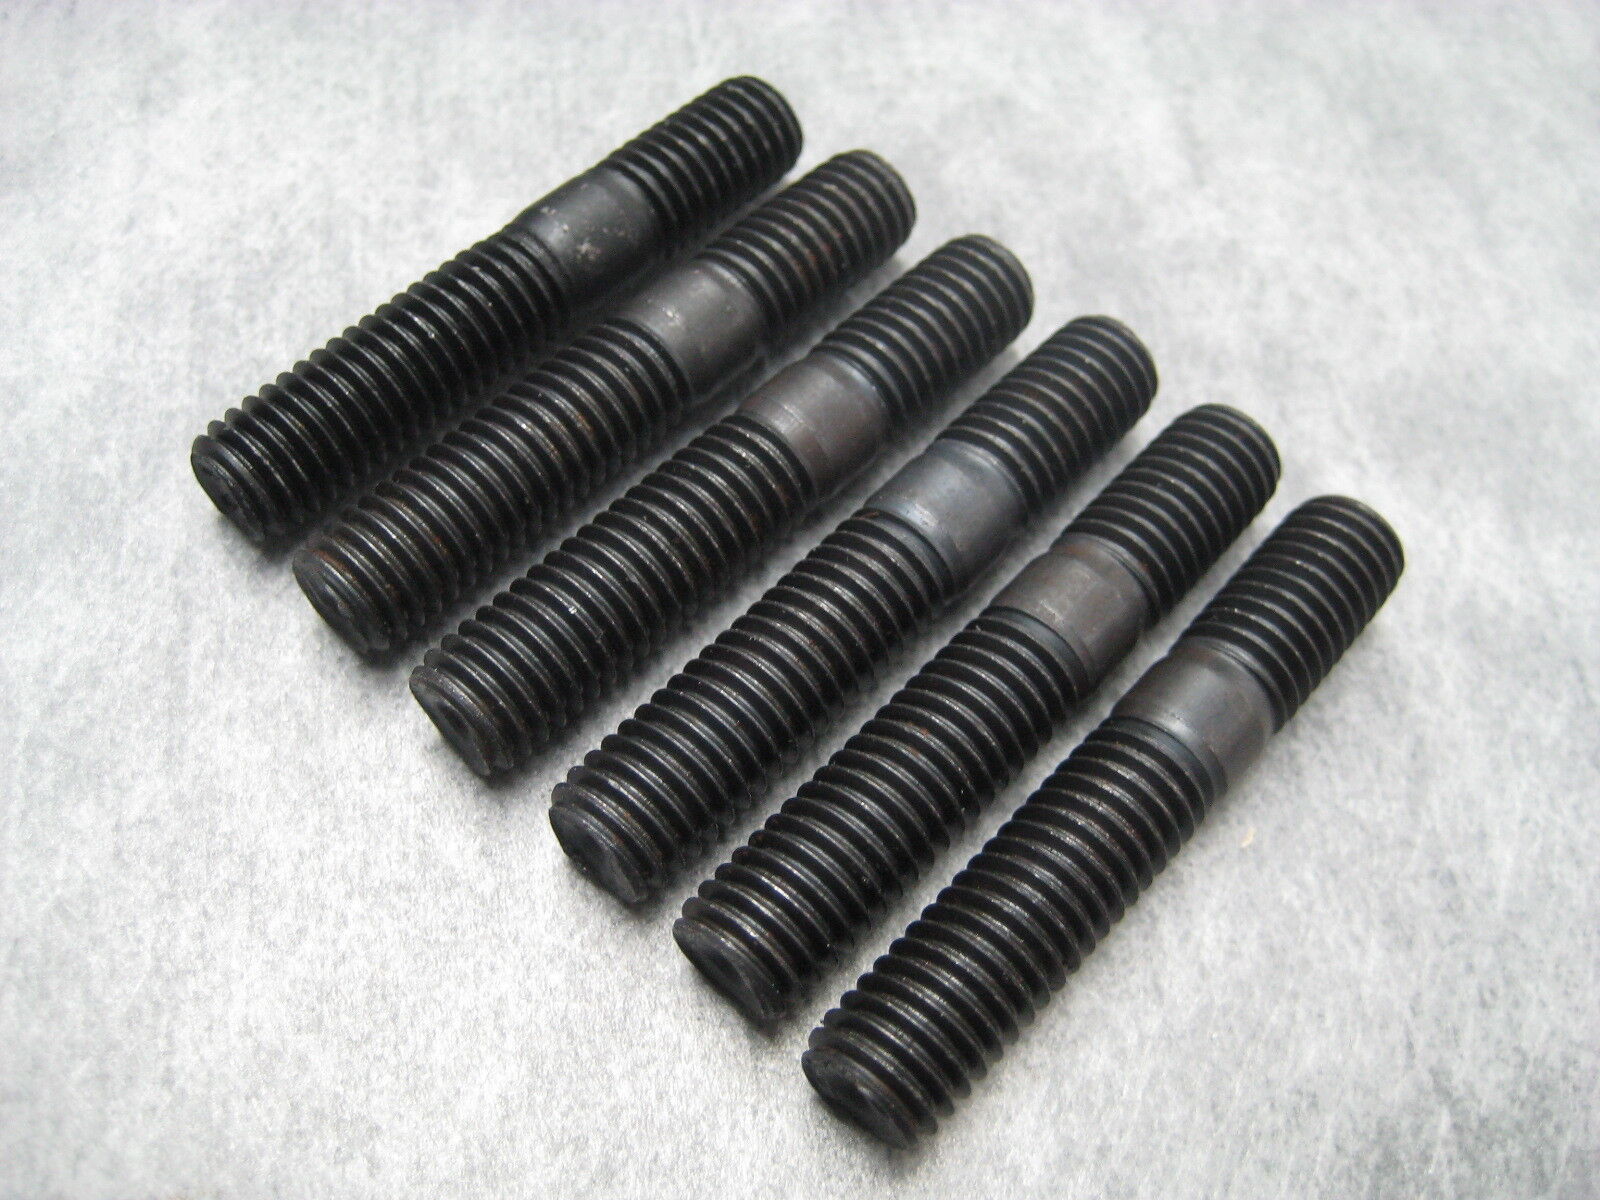 8mm Exhaust Manifold Stud M8x1.25 - Pack of 6 Studs - Ships Fast